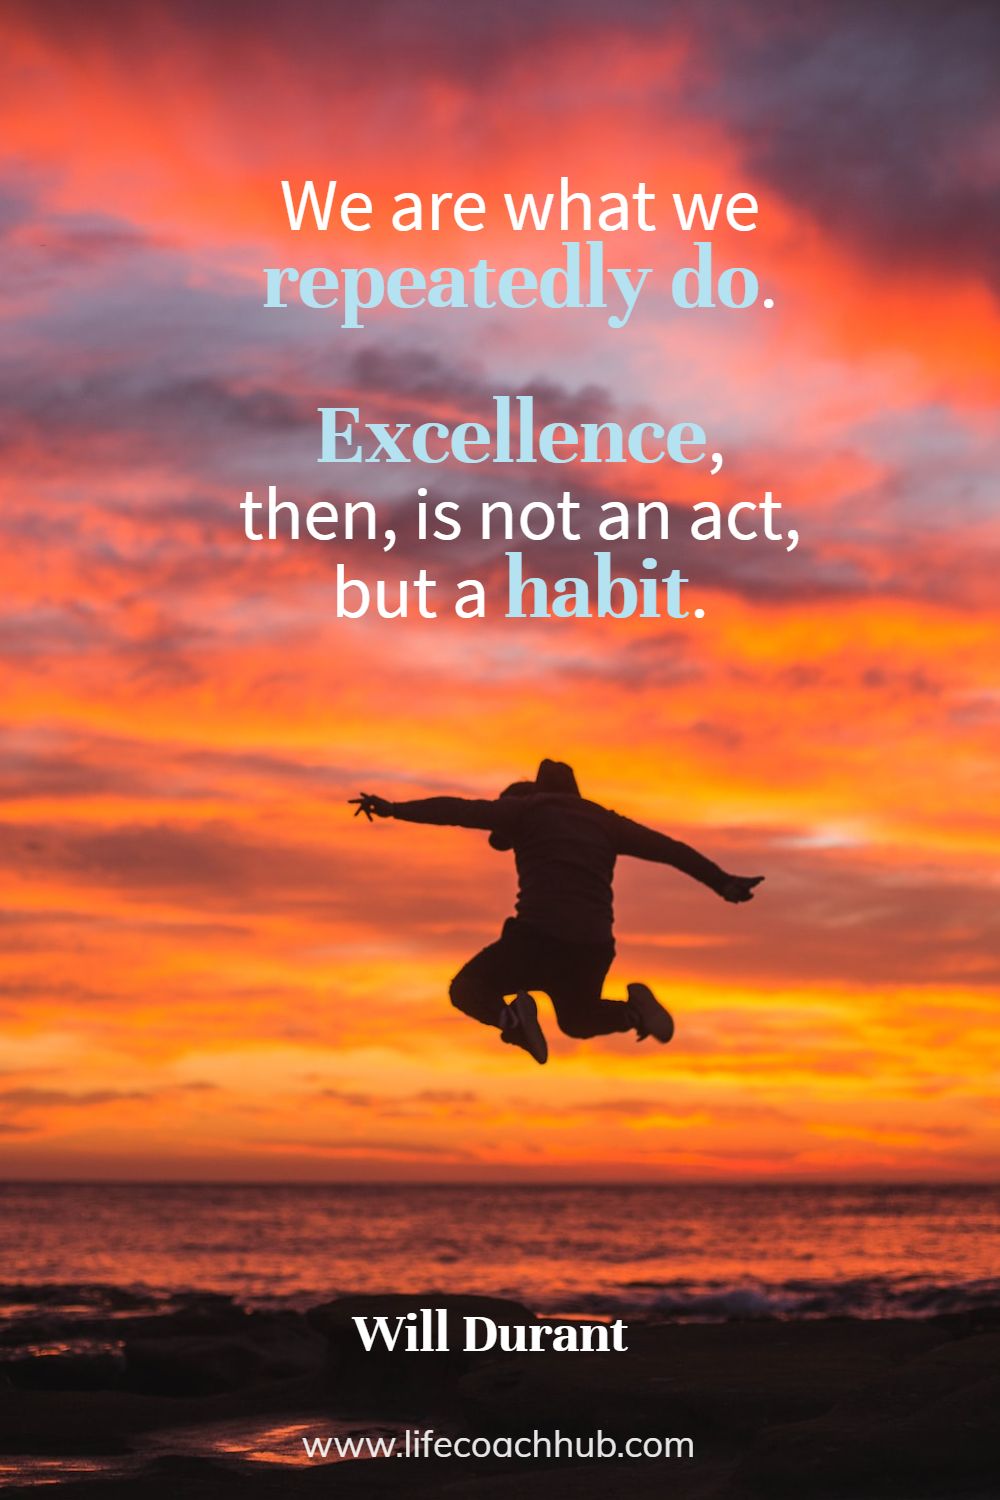 We are what we repeatedly do. Excellence, then, is not an act, but a habit. Will Durant Coaching Quote